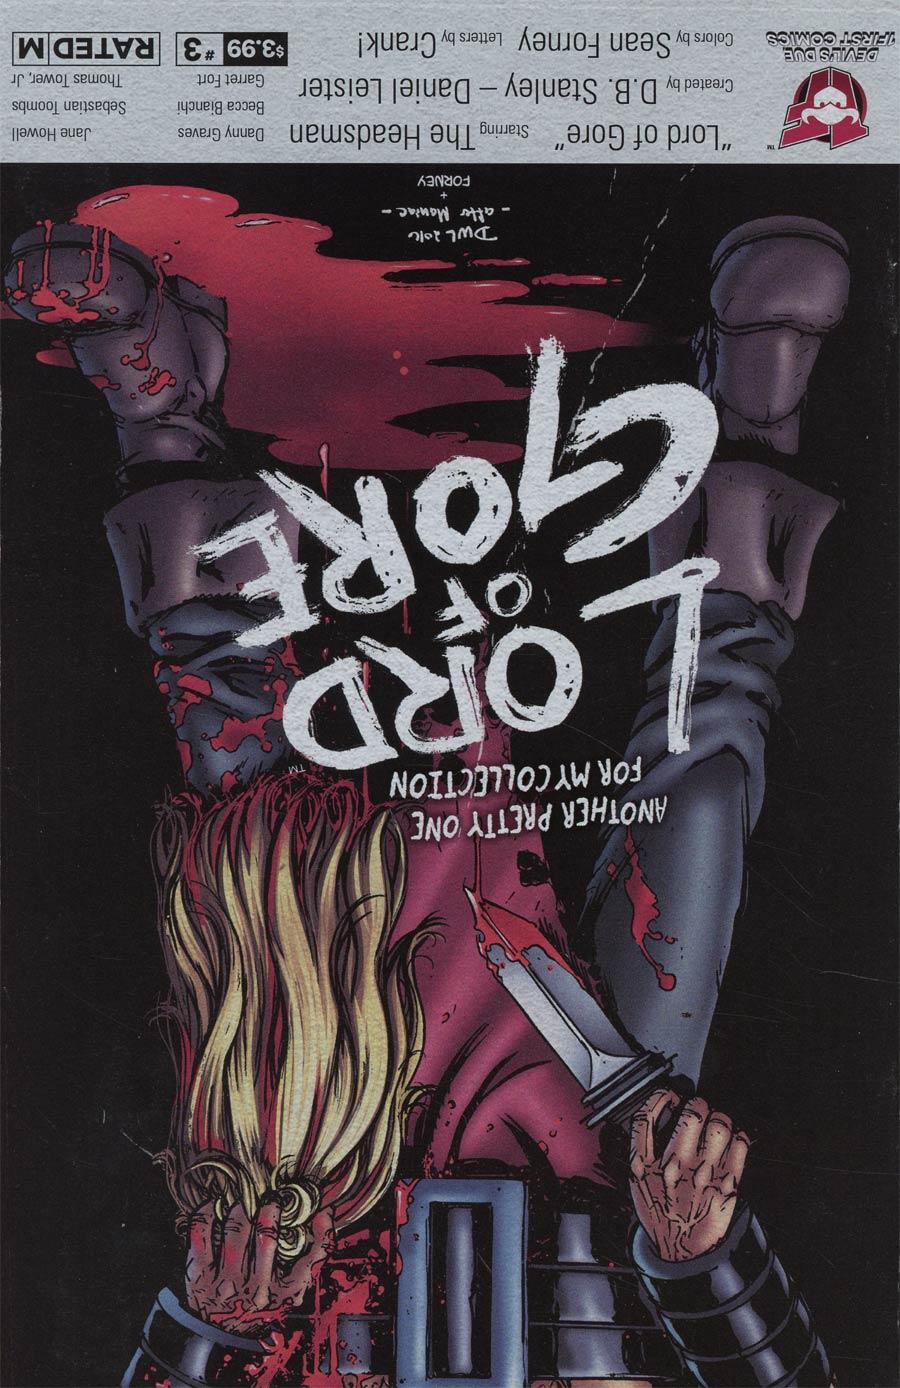 Lord Of Gore Vol. 1 #3